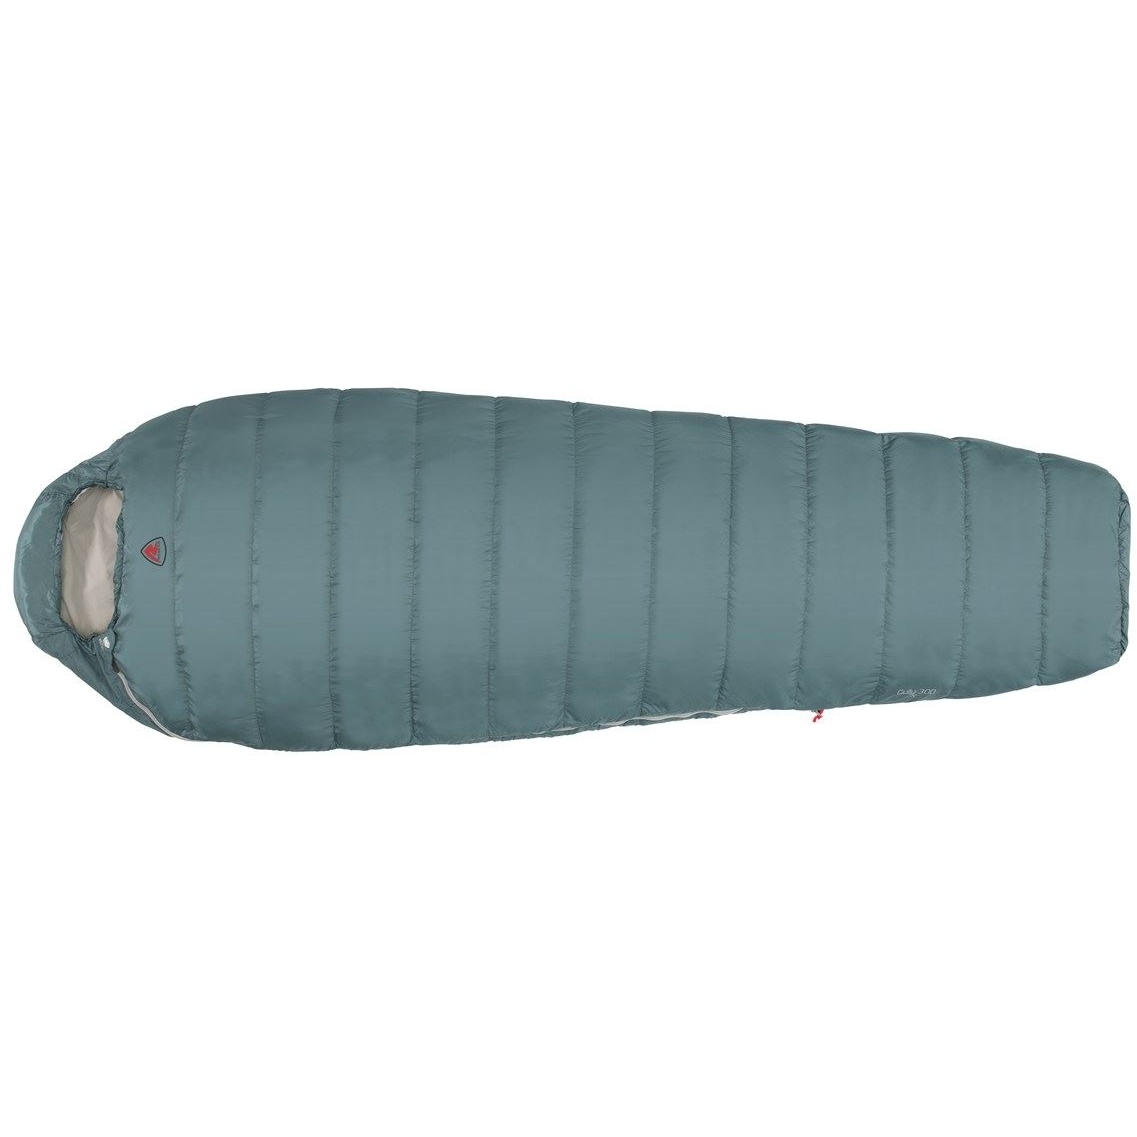 Picture of Robens Gully 300 Sleeping Bag - Zip Right - Ocean Blue